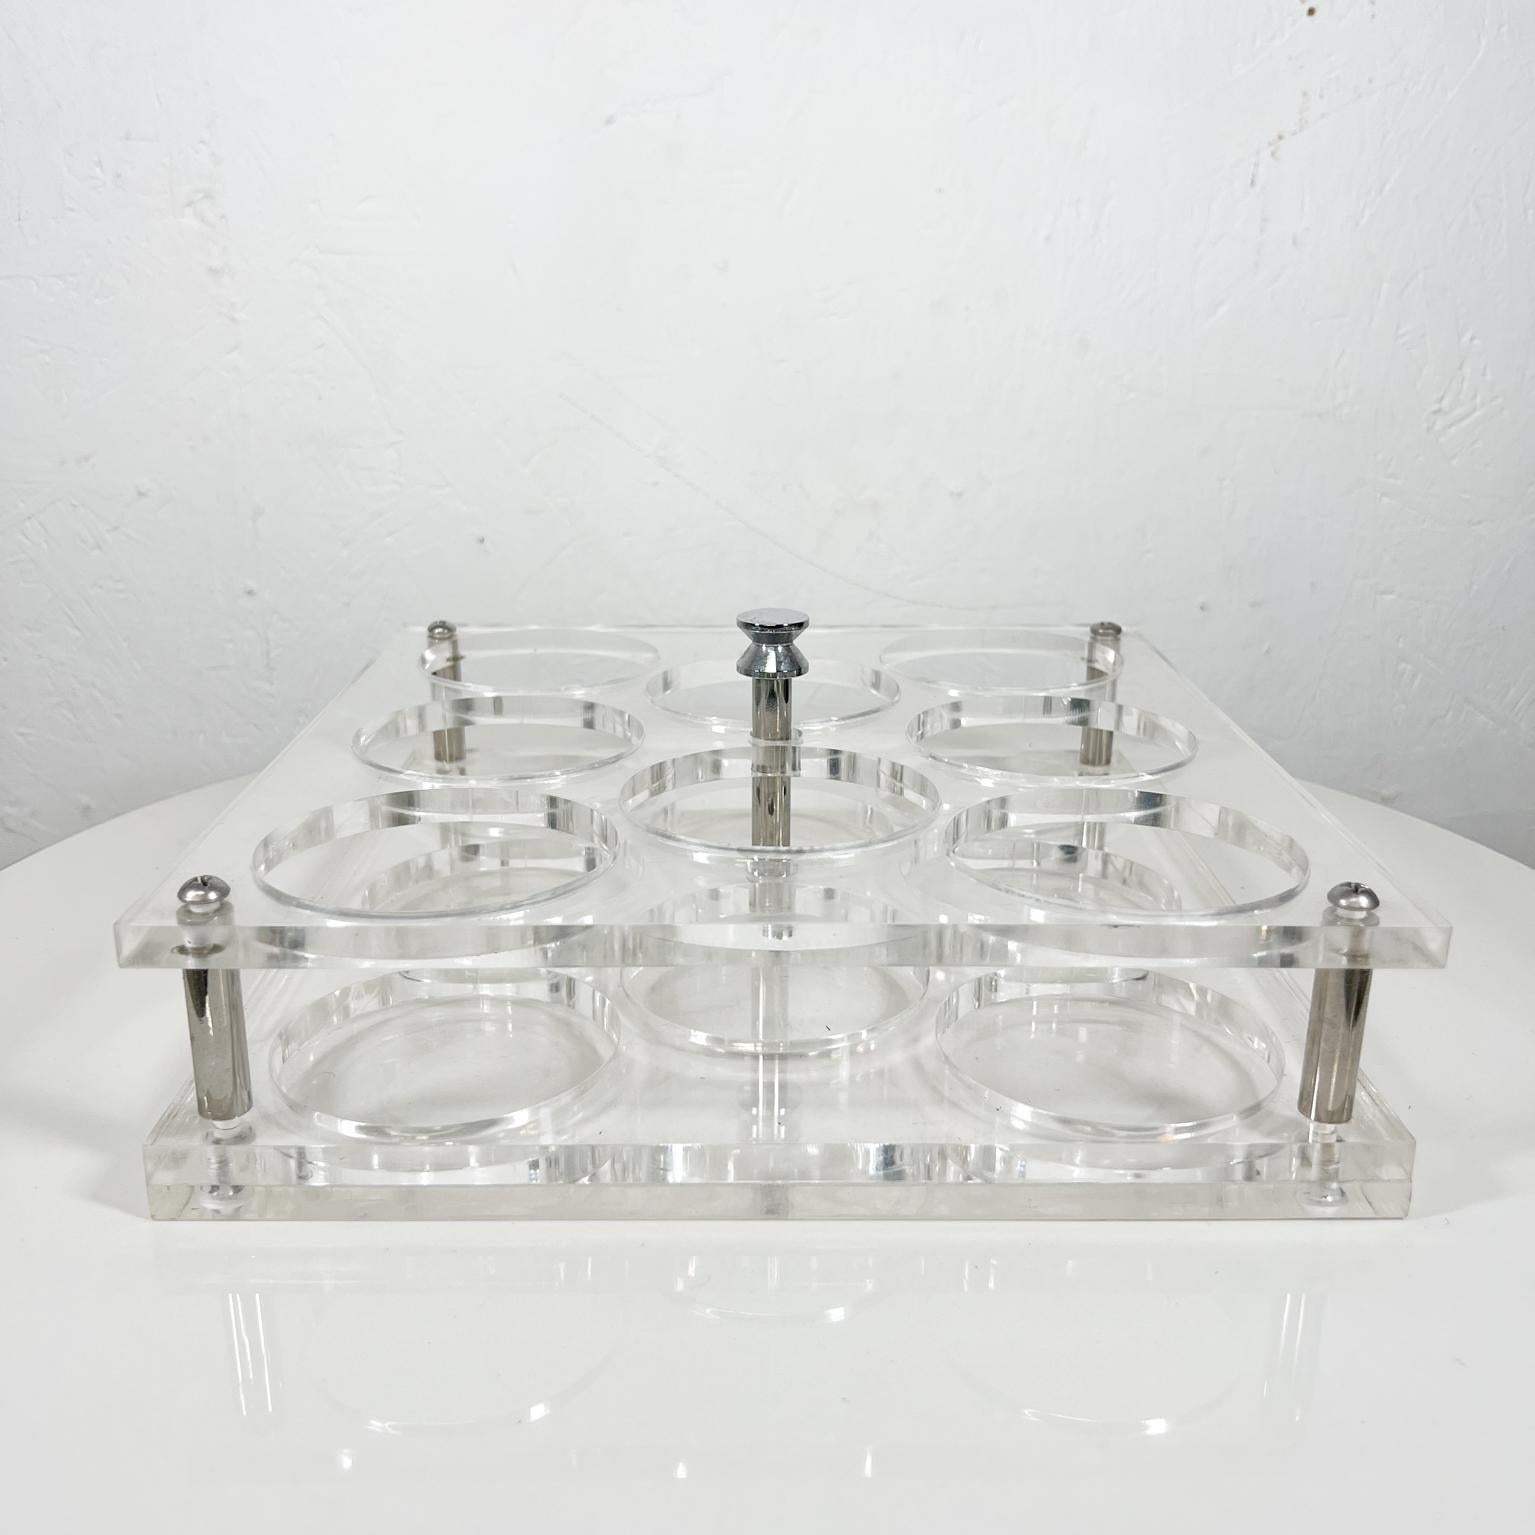 1970s Mid-Century Modern lucite beverage bar drink caddy carrier server tray.
Eight glass holder carrier
Measures: 12.25 x 11.75 x 4.5 H
Maker info not present. 
Original vintage unrestored condition.
Refer to images please.



